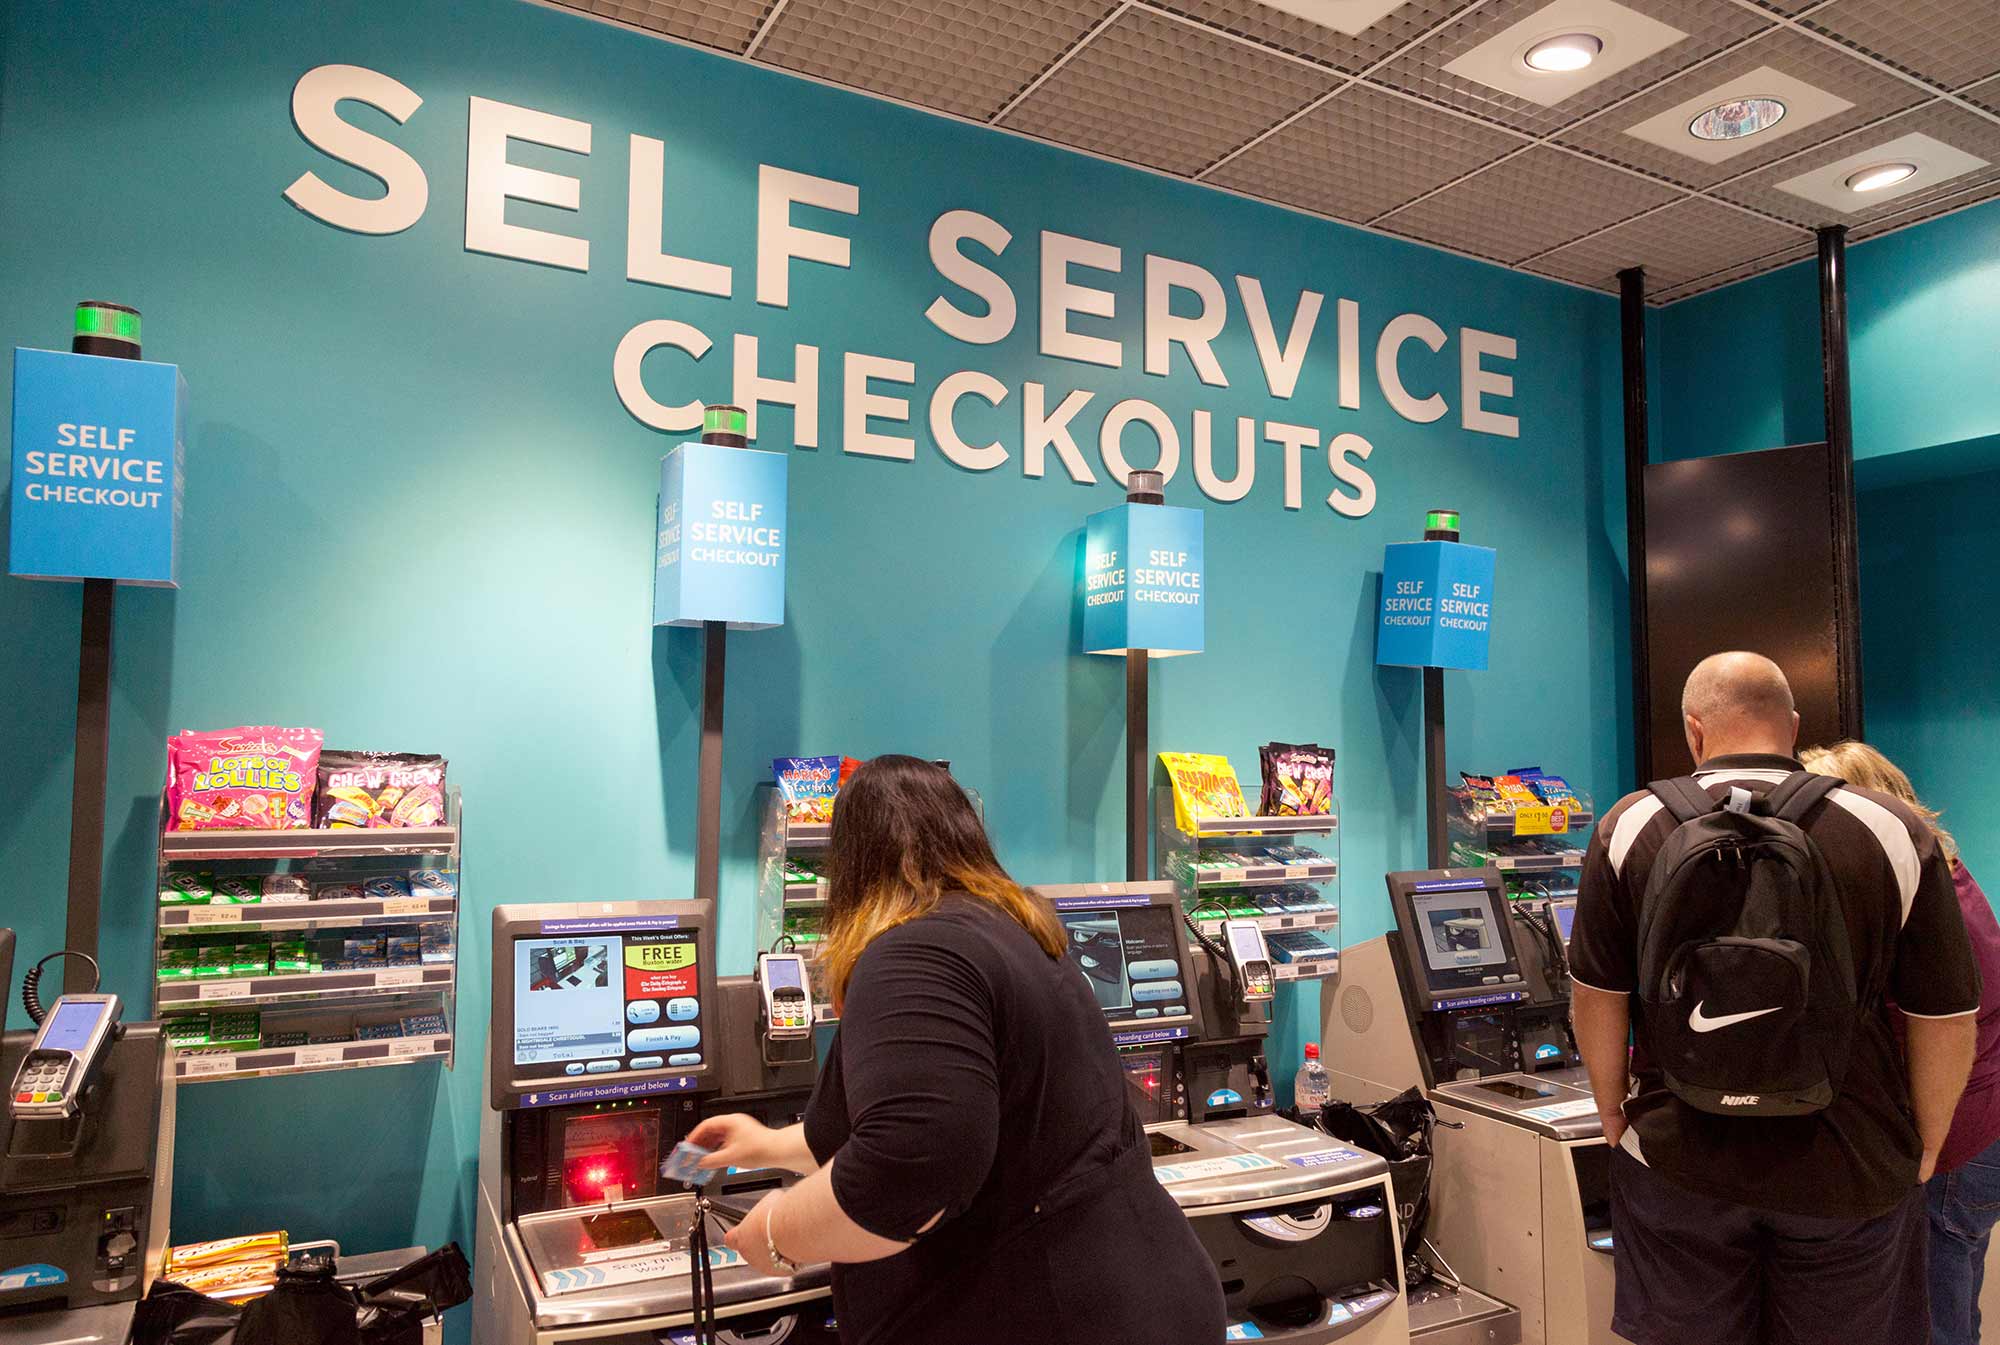 Self service shop. Self service. Self-service checkout. Checkout in a shop.